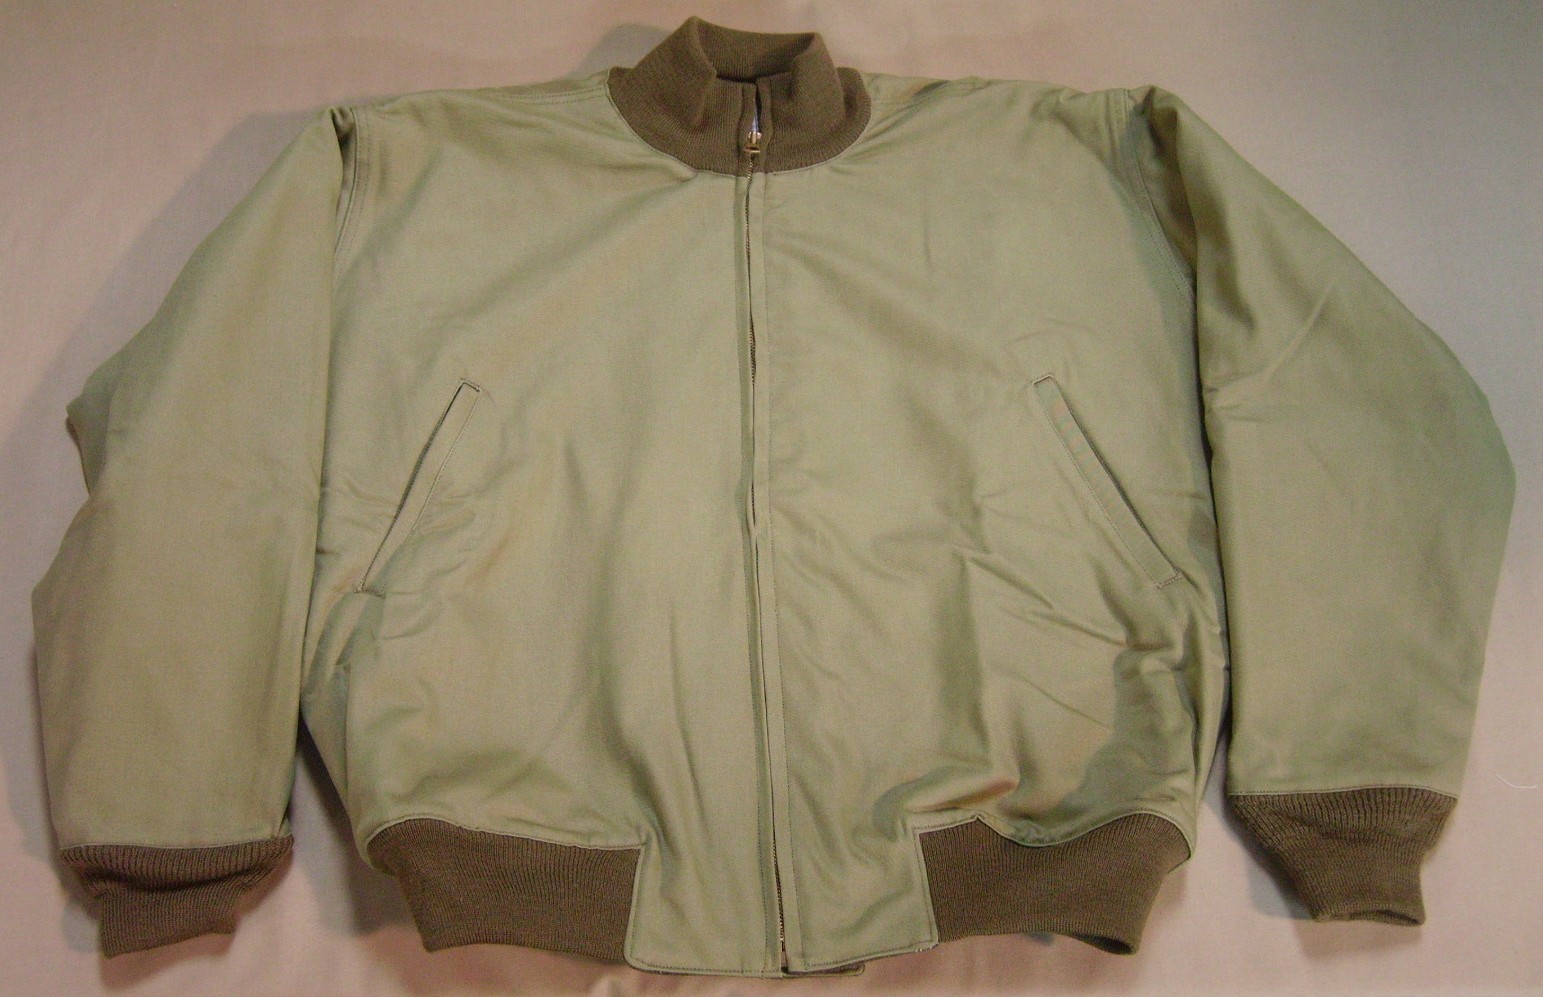 SECRETFORTS: Of Material Interest: The US Army Tanker Jacket.